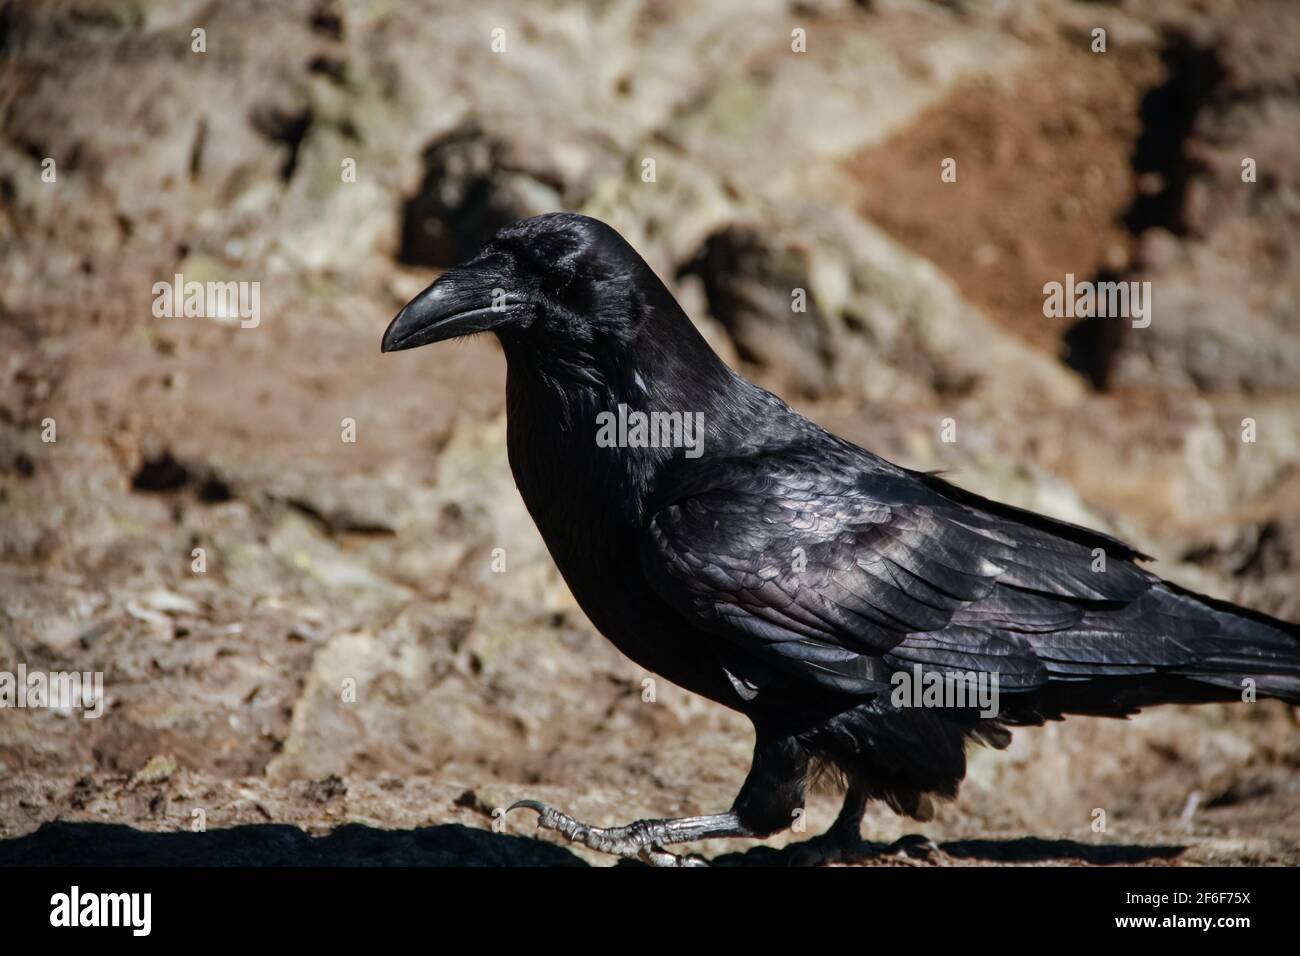 October 10 2018: A northwestern crow, or corvus caurinus, poses for the camera at the Dog Mountain summit lookout in North Vancouver, British Columbia Stock Photo